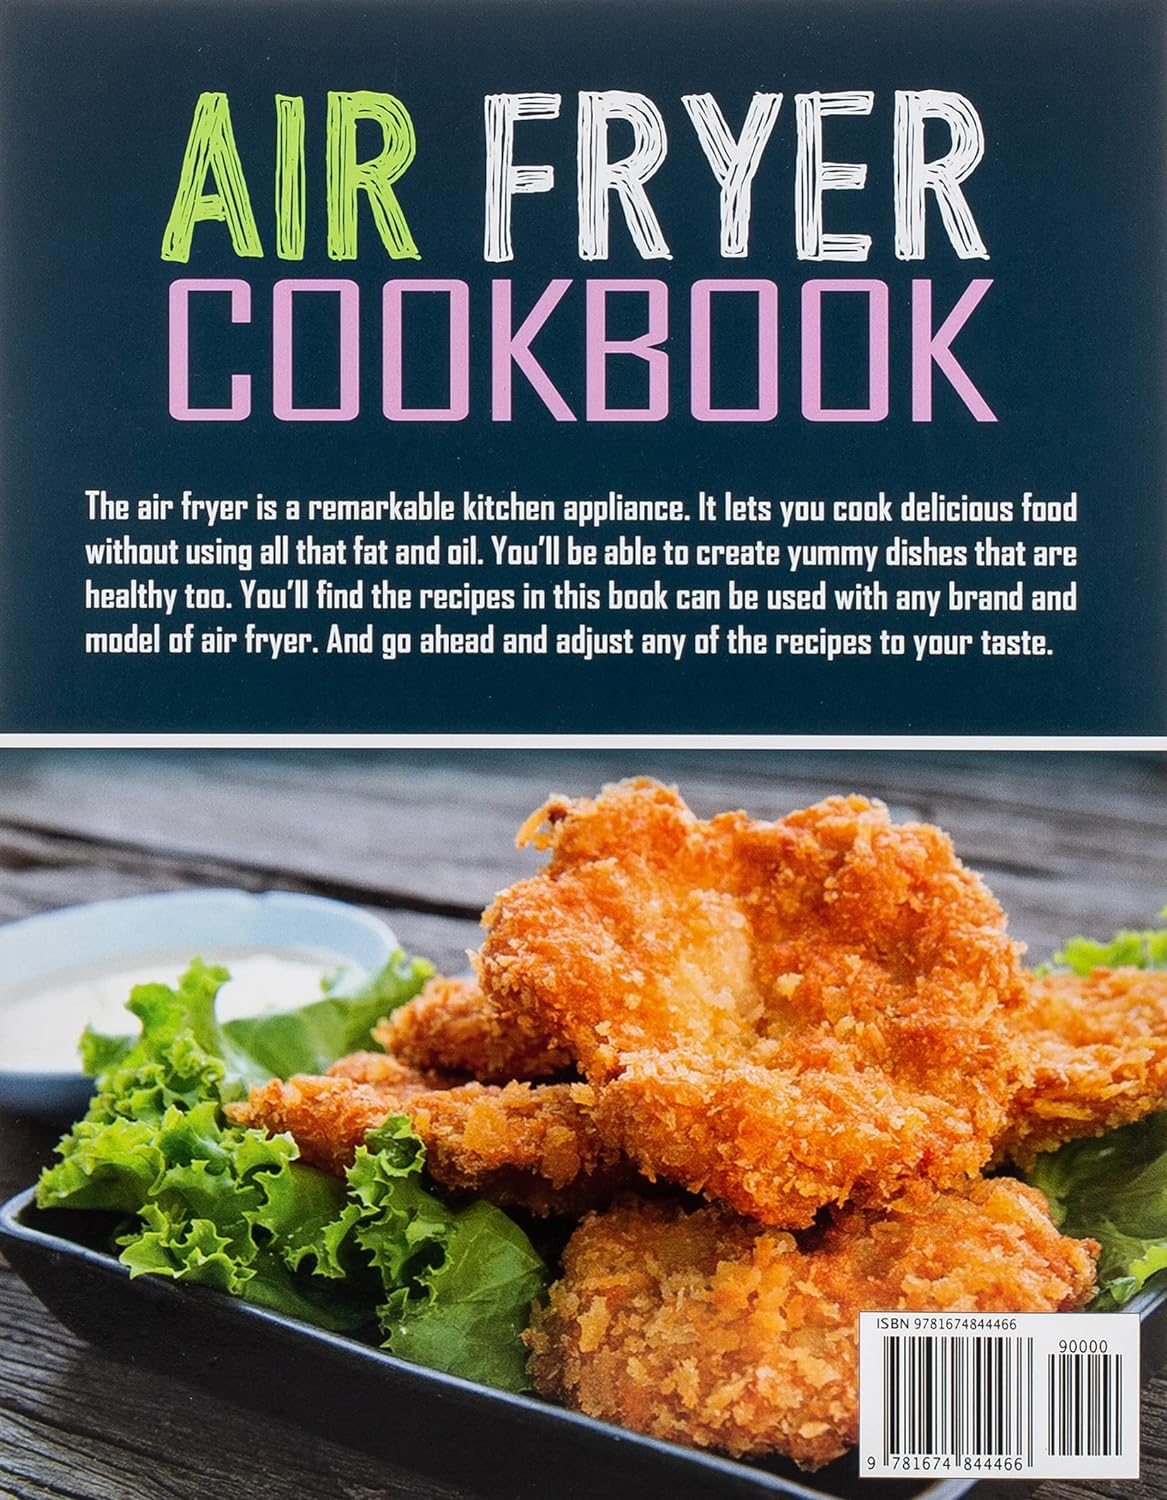 Air Fryer Cookbook: 600 Effortless Air Fryer Recipes for Beginners and Advanced Users     Paperback – December 12, 2019